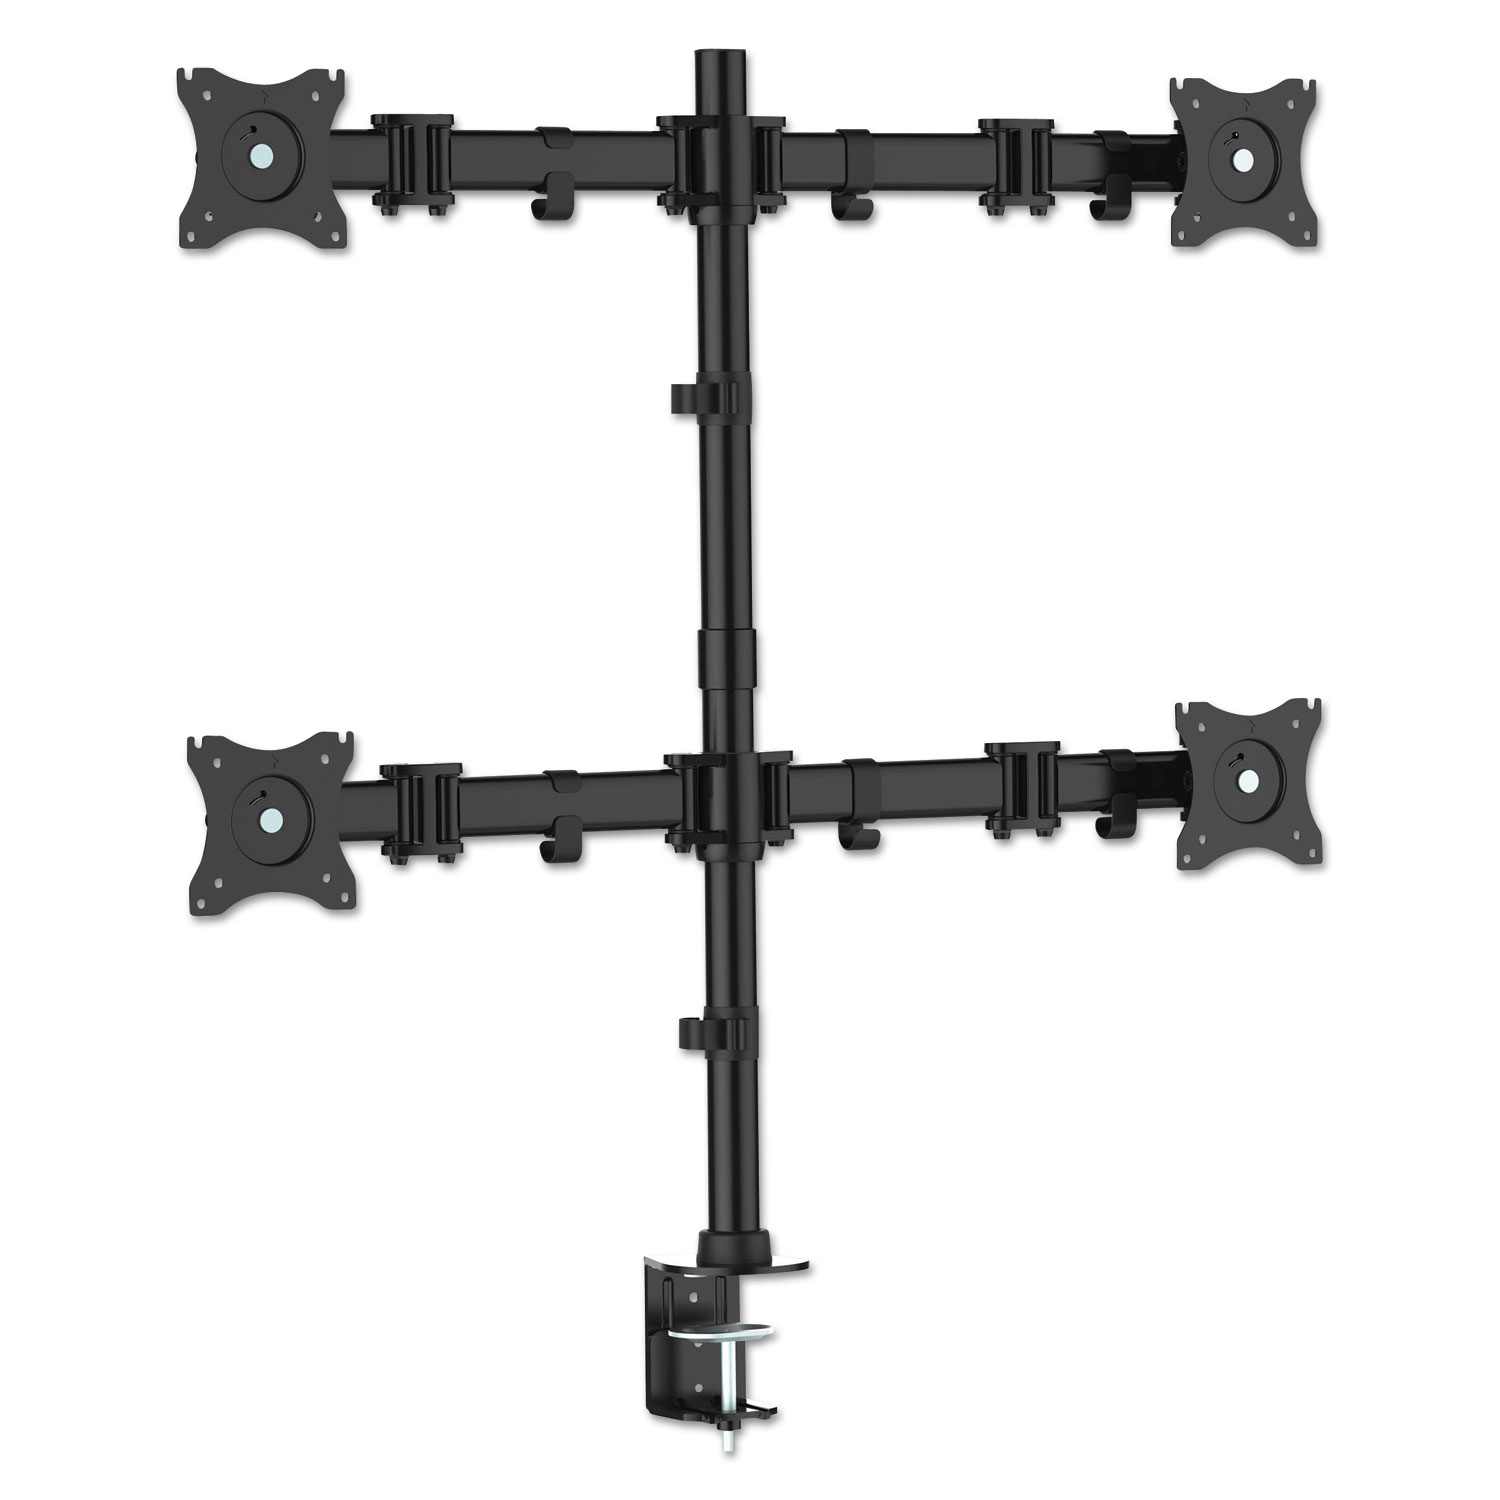 Articulating Multiple Monitor Arms for Four Monitors, Desk Mount